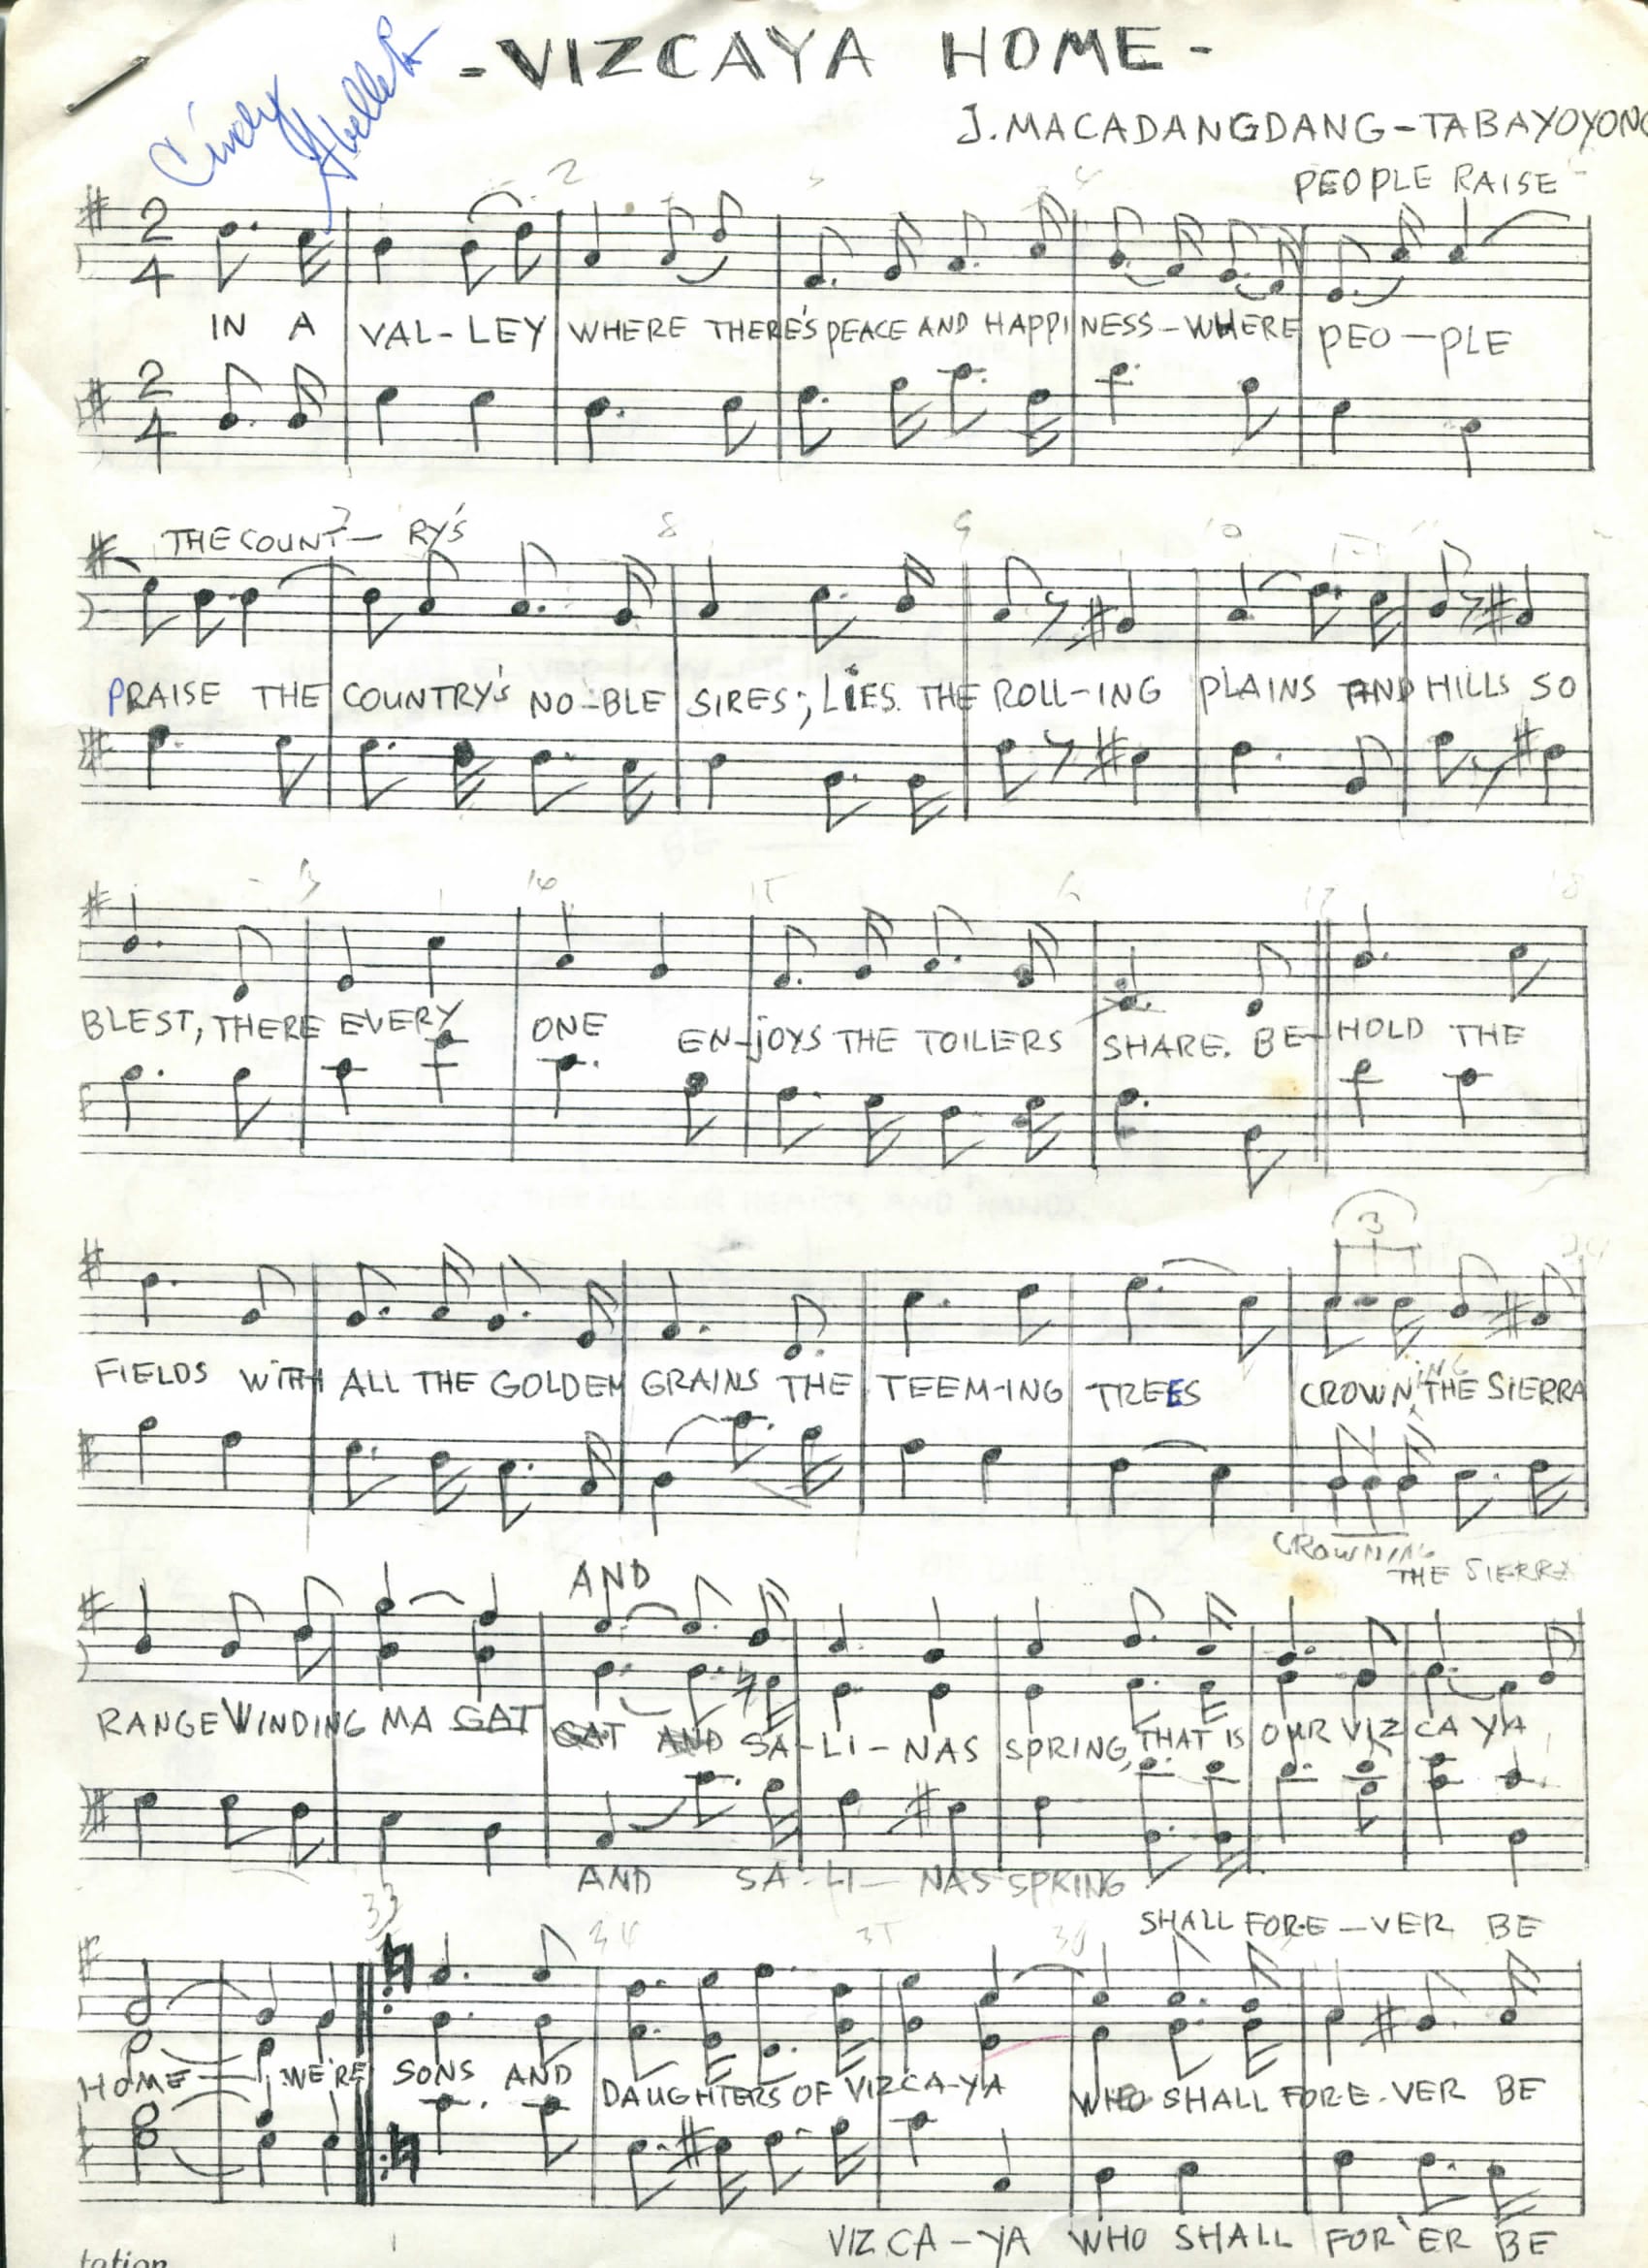 Scanned document owned by Kristen Surla. Sheet music. Acquired around 2000 from her late grandmother’s belongings. Made in Bayombong, Nueva Vizcaya. Lyrics in English. Surla felt that this was significant because her grandmother was a part of a Filipino Americanorganization for Bayombong, Nueva Vizcaya. This song was sung as the welcome anthem at the organization’s events. It is specific to their village. Any views, findings, conclusions, or recommendations expressed in this story do not necessarily represent those of the National Endowment for the Humanities. (c) Field Museum of Natural History - CC BY-NC 4.0